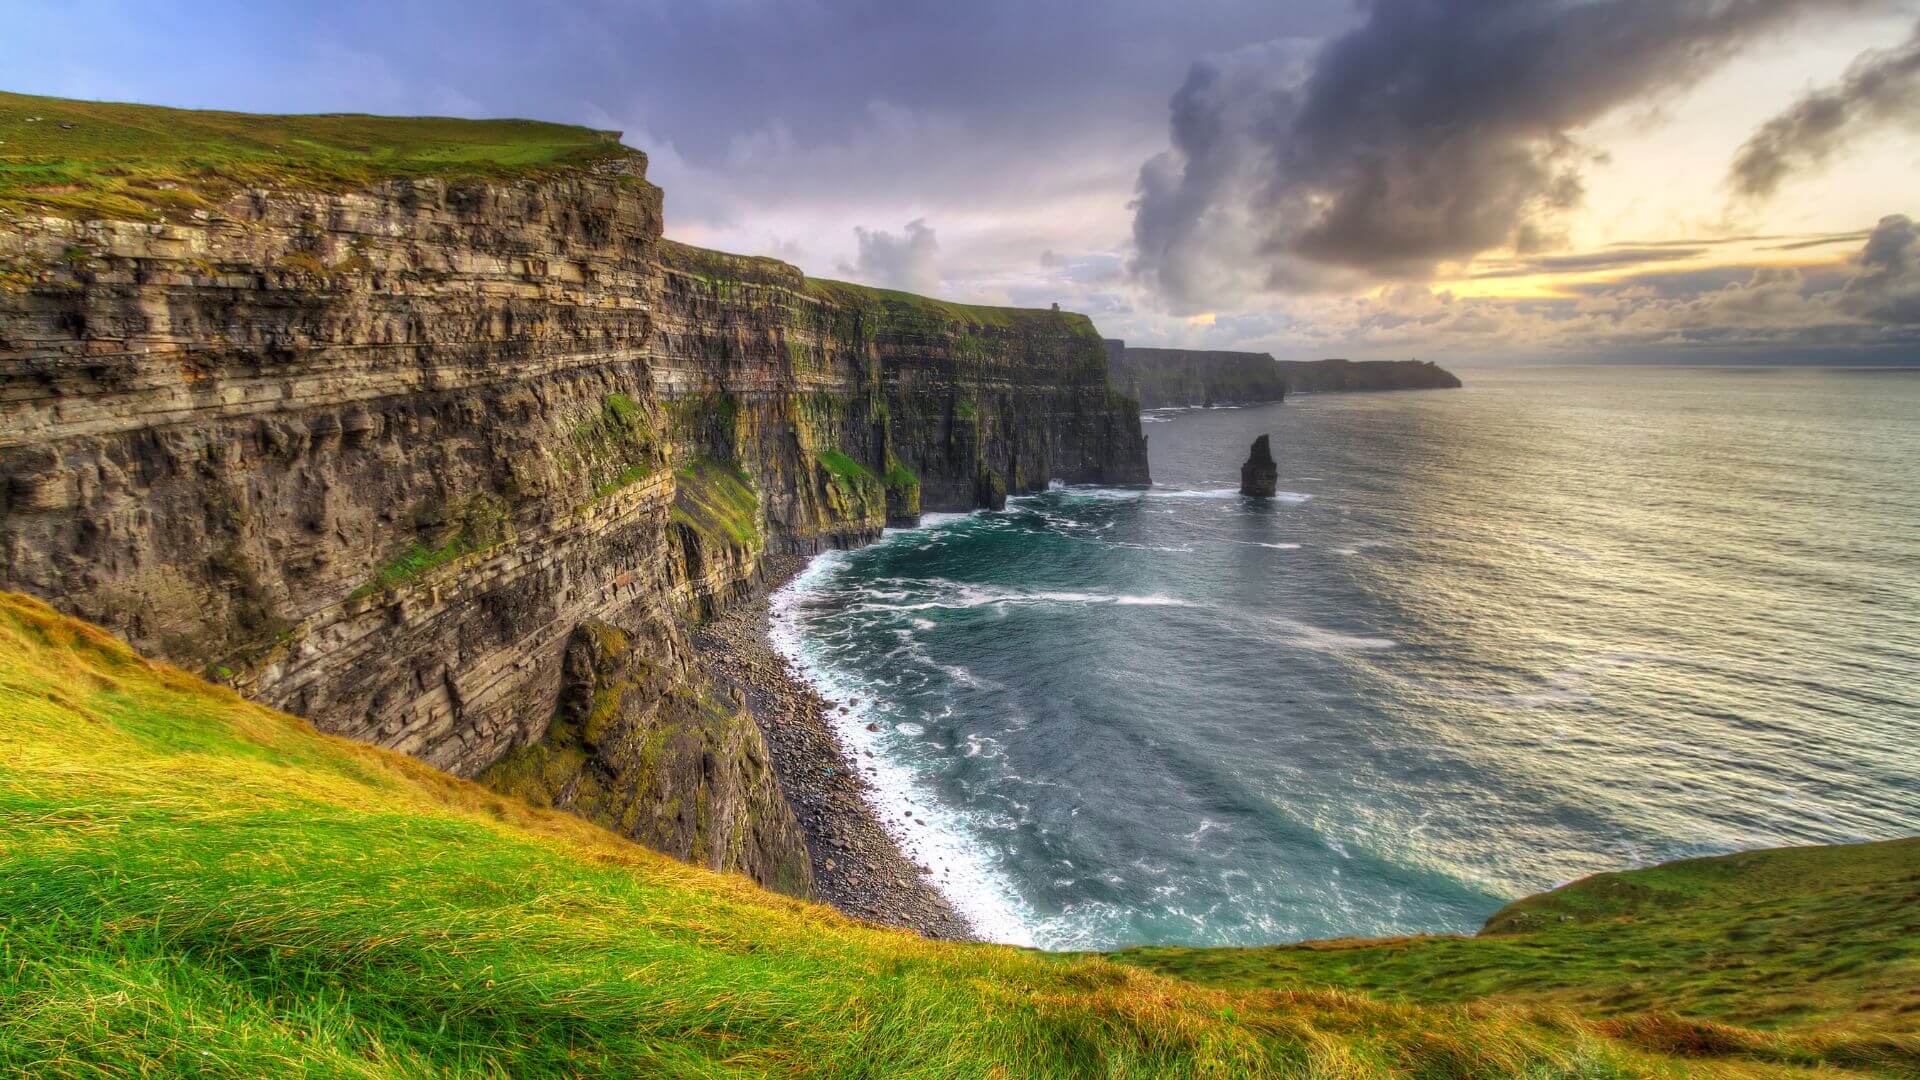 How Best To Experience Some Of Ireland's Interesting Islands